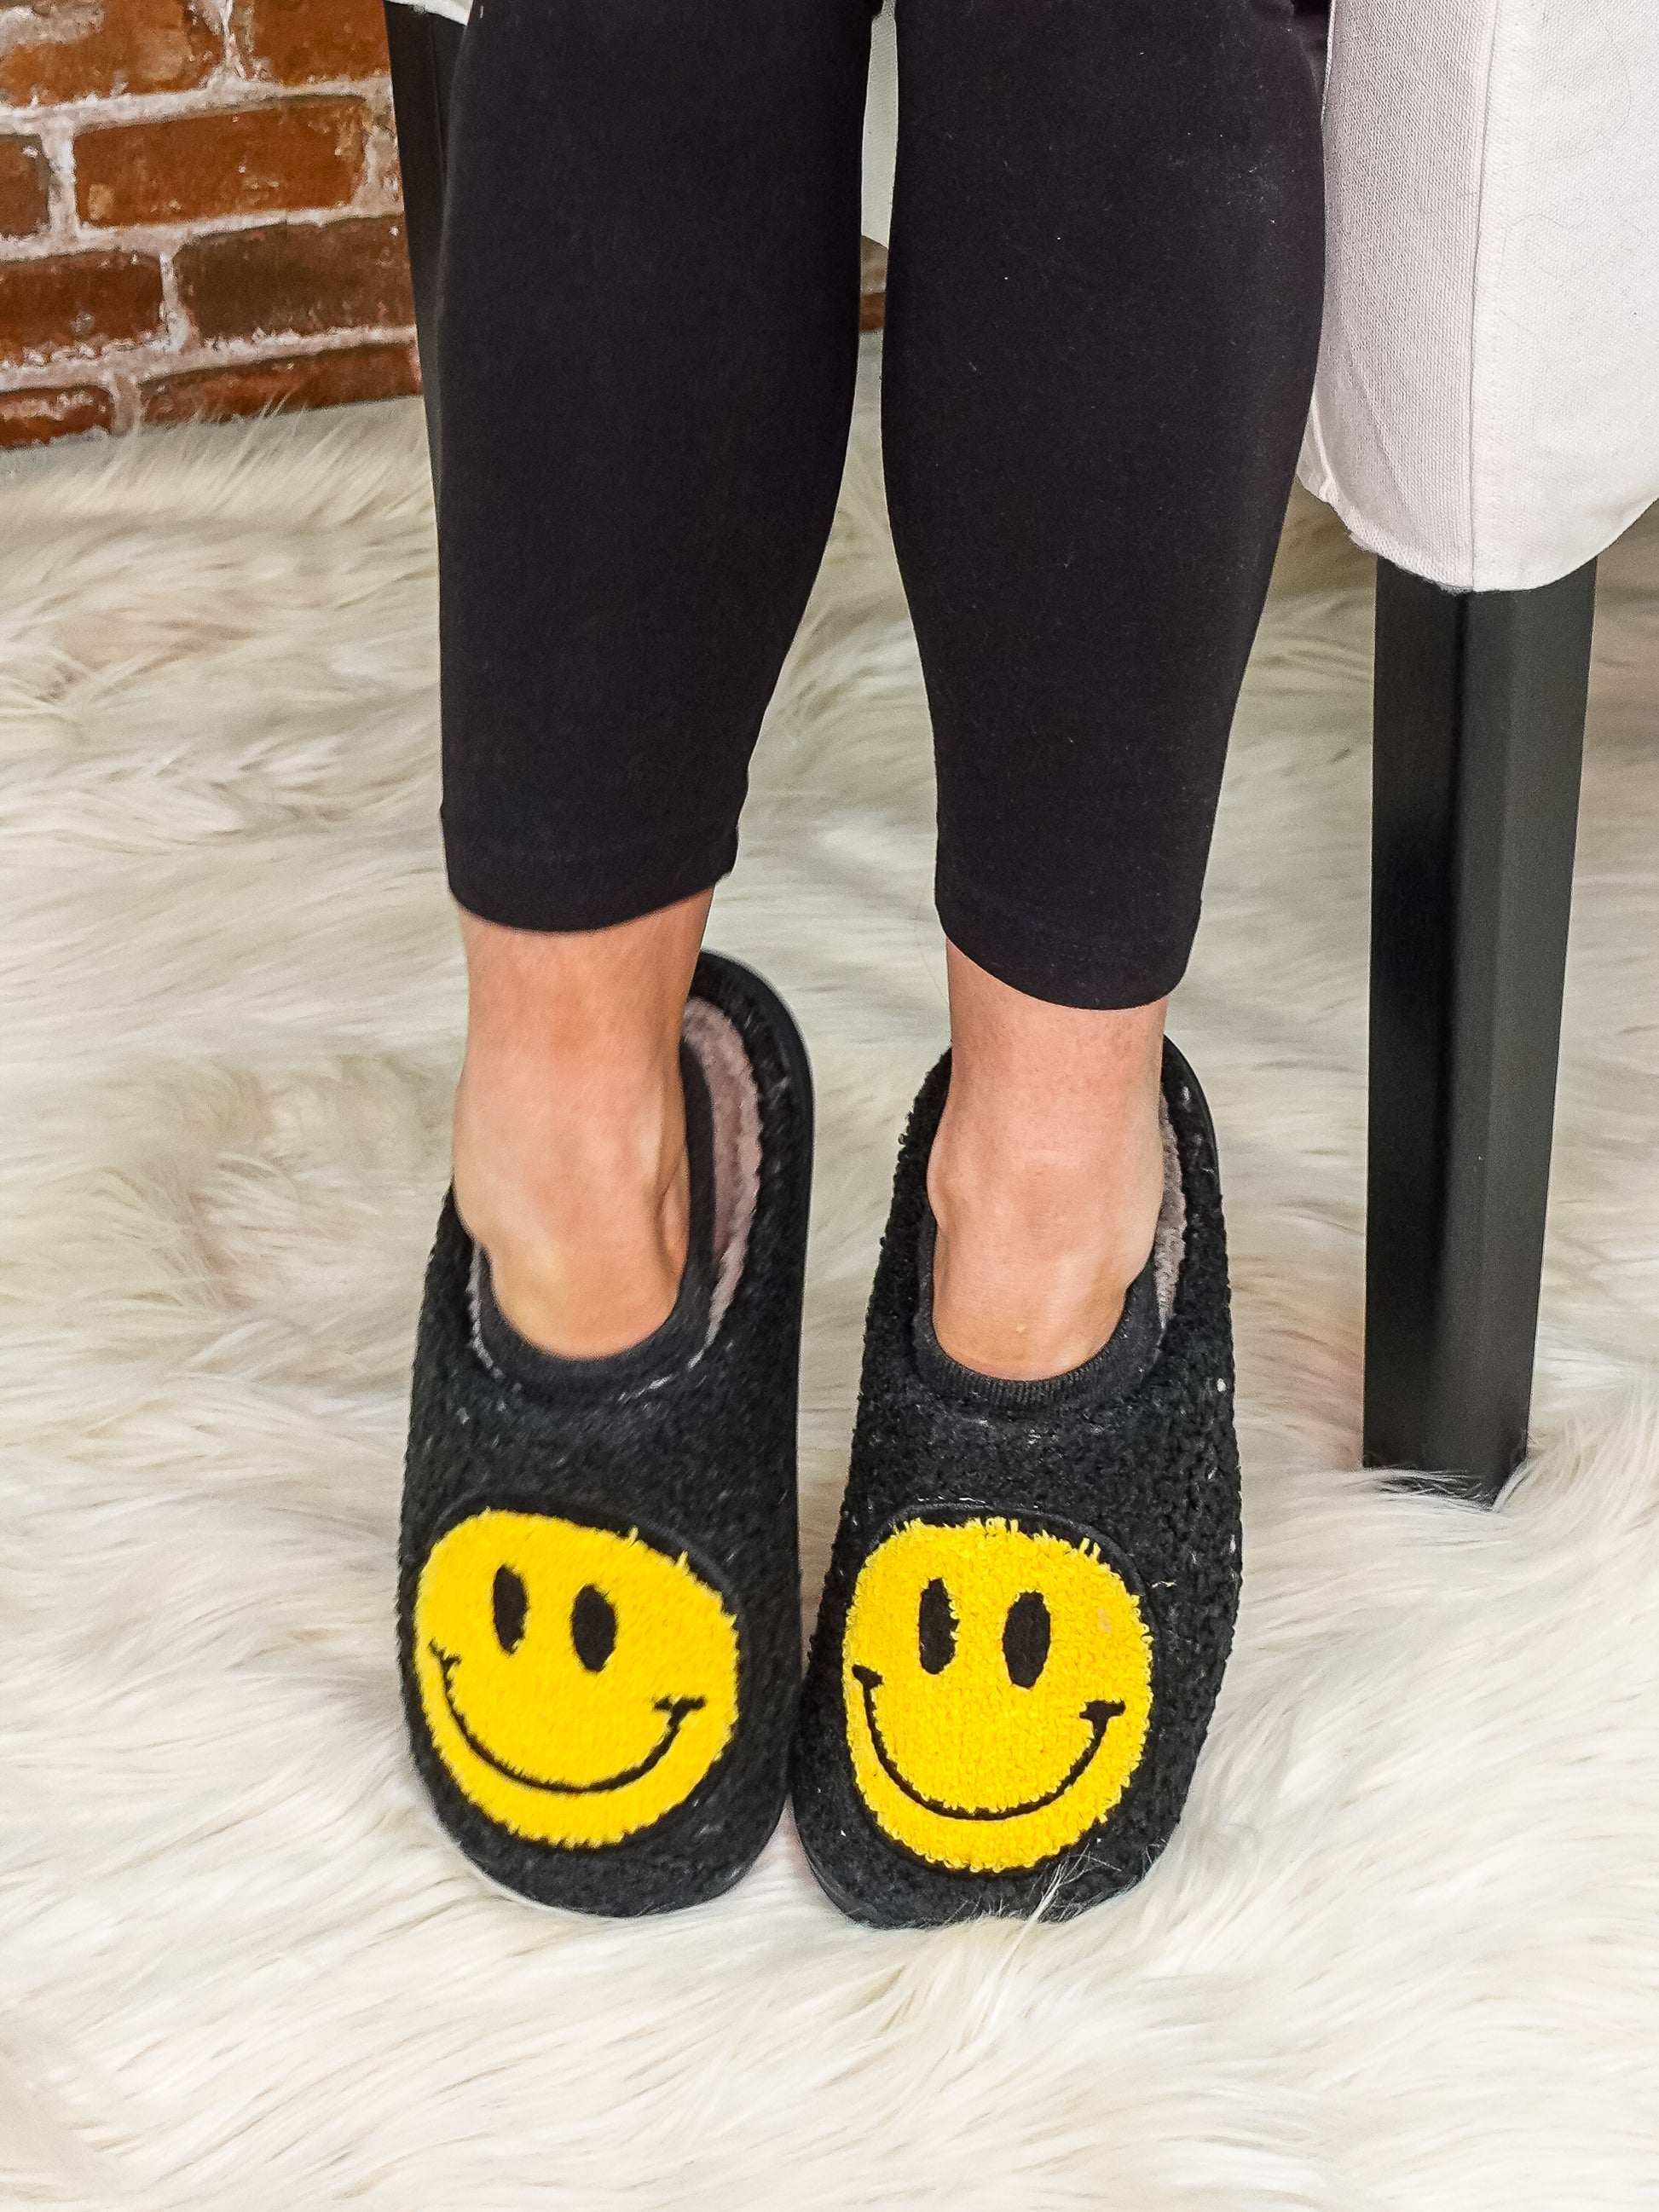 Smily face slippers in black with yellow smily.